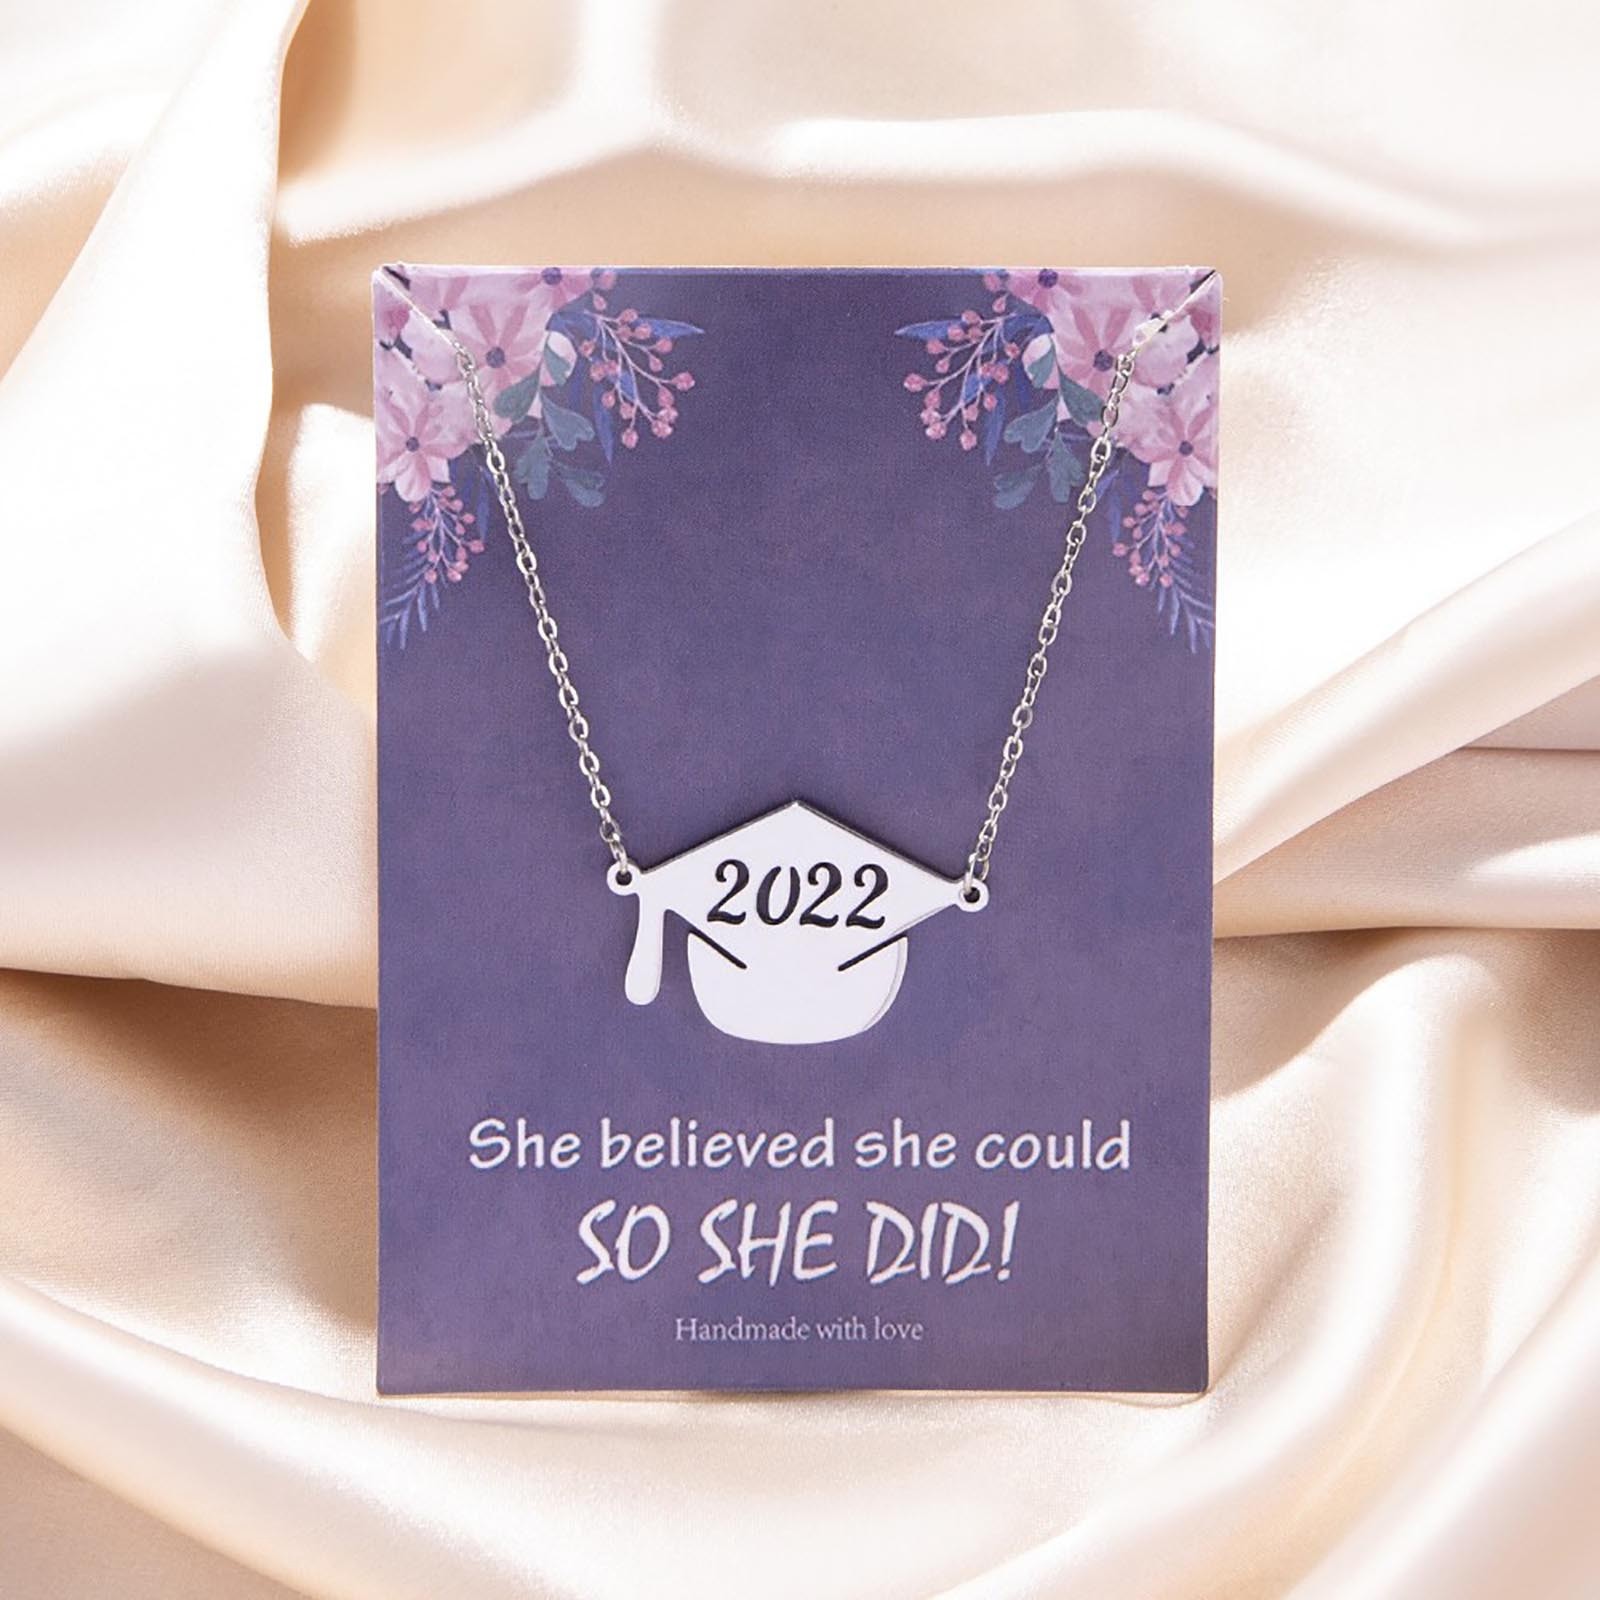 Apmemiss Clearance Graduation Gifts 2022 Graduation Gifts Pendant Necklace, Ladies Necklace Memorial Pendant Jewelry Gift, College Graduation Necklace Friendship Gifts For Her Graduation Decorations - image 1 of 8